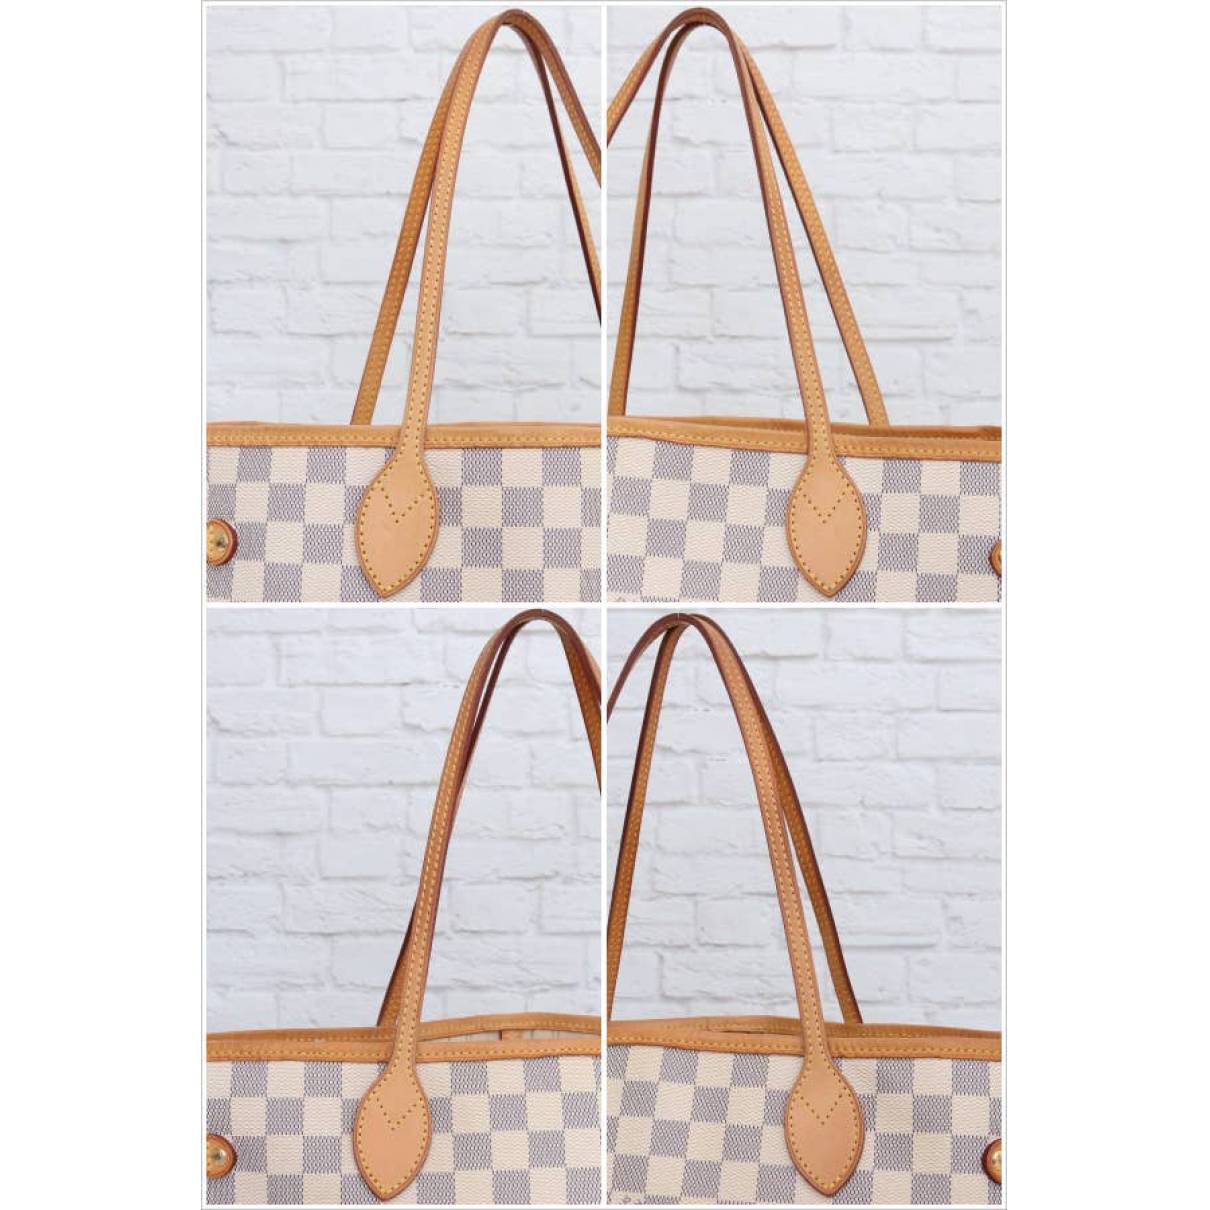 Neverfull leather tote Louis Vuitton